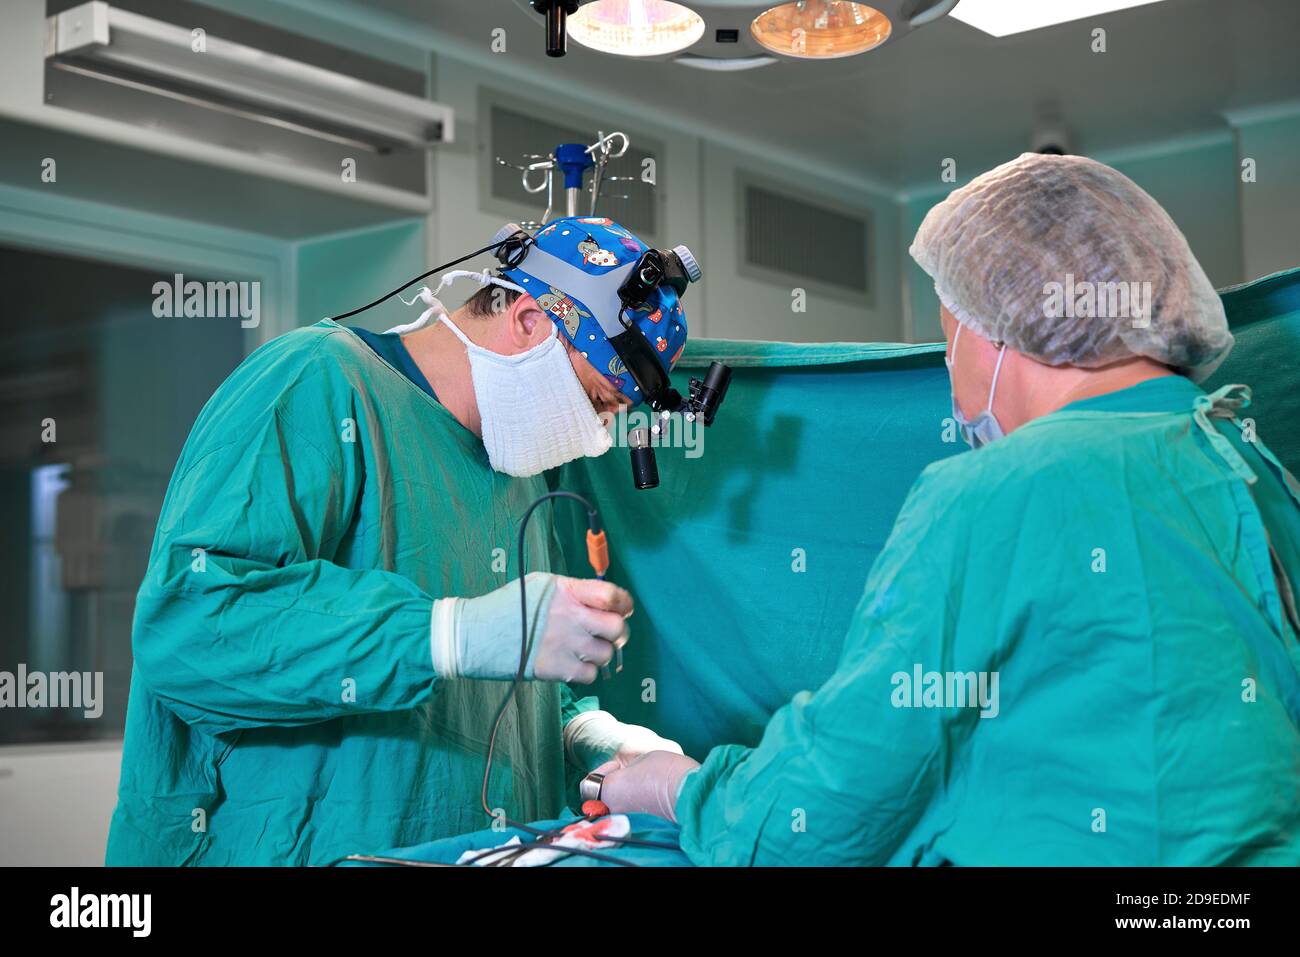 Surgeon and his assistant performing cosmetic surgery on nose in hospital operating room. Nose reshaping, augmentation. Rhinoplasty. Stock Photo